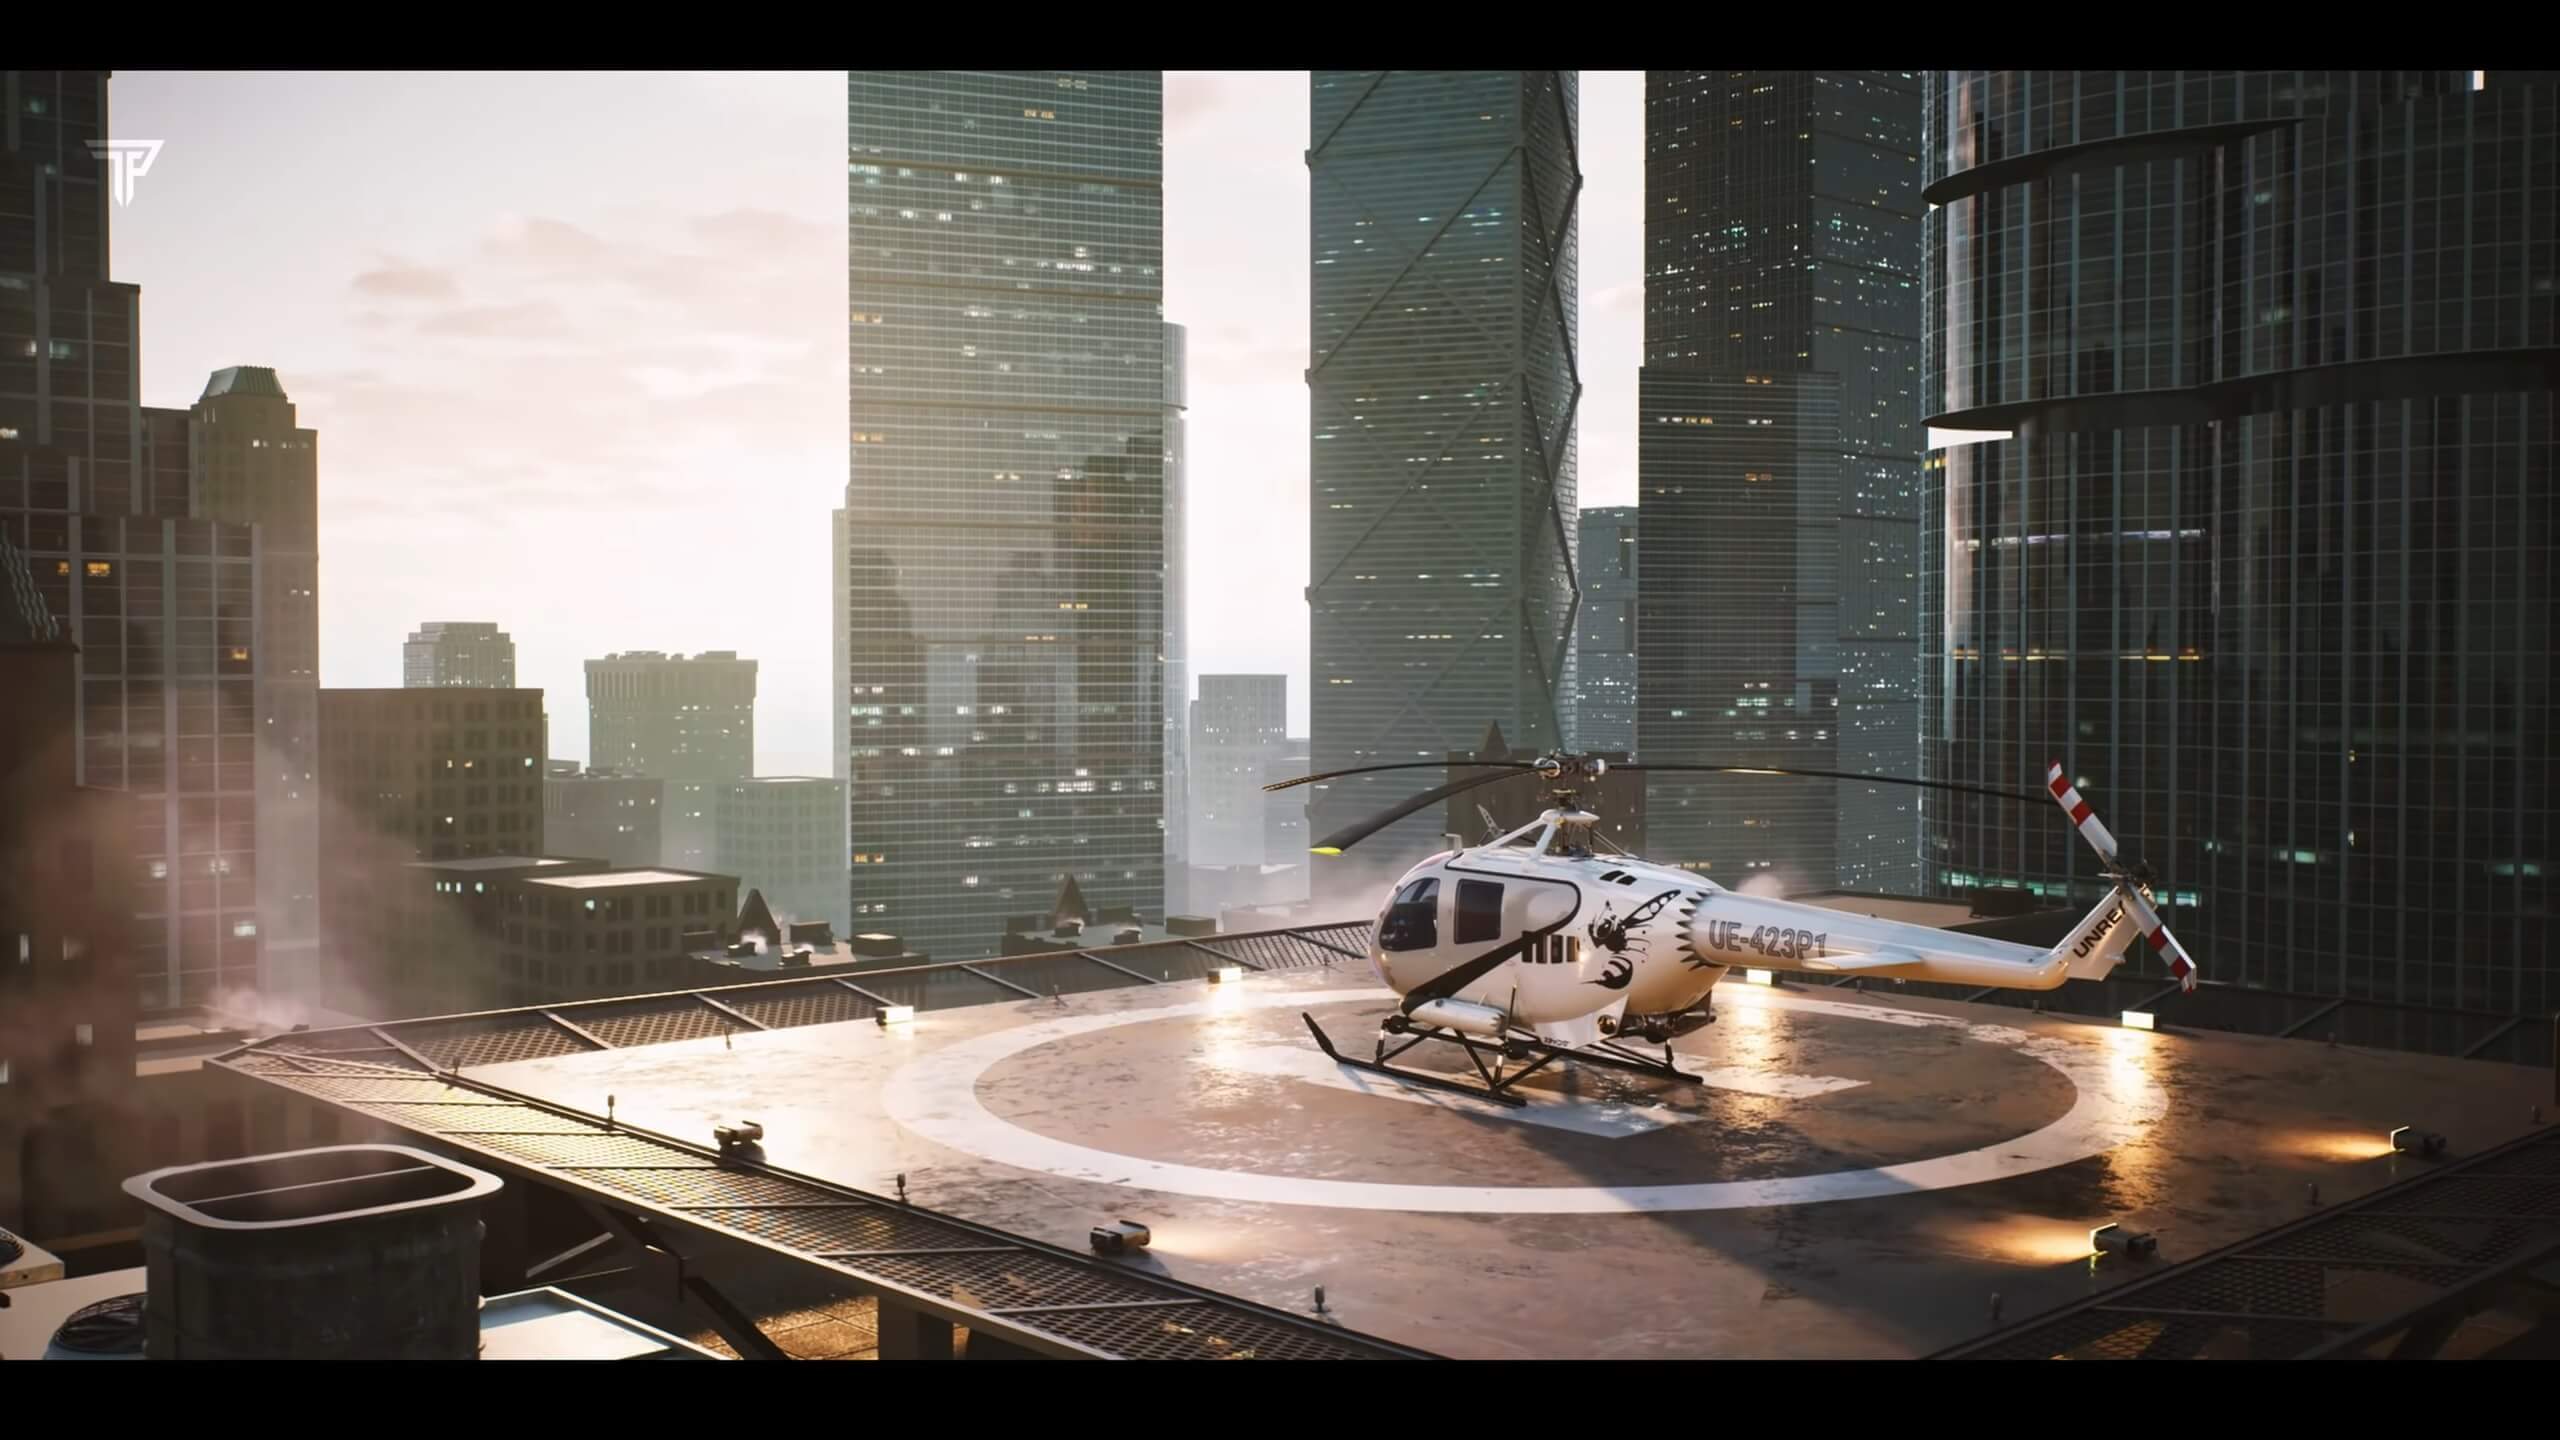 GTA 6 Unreal Engine 5 trailer gets fans hyped for the main event